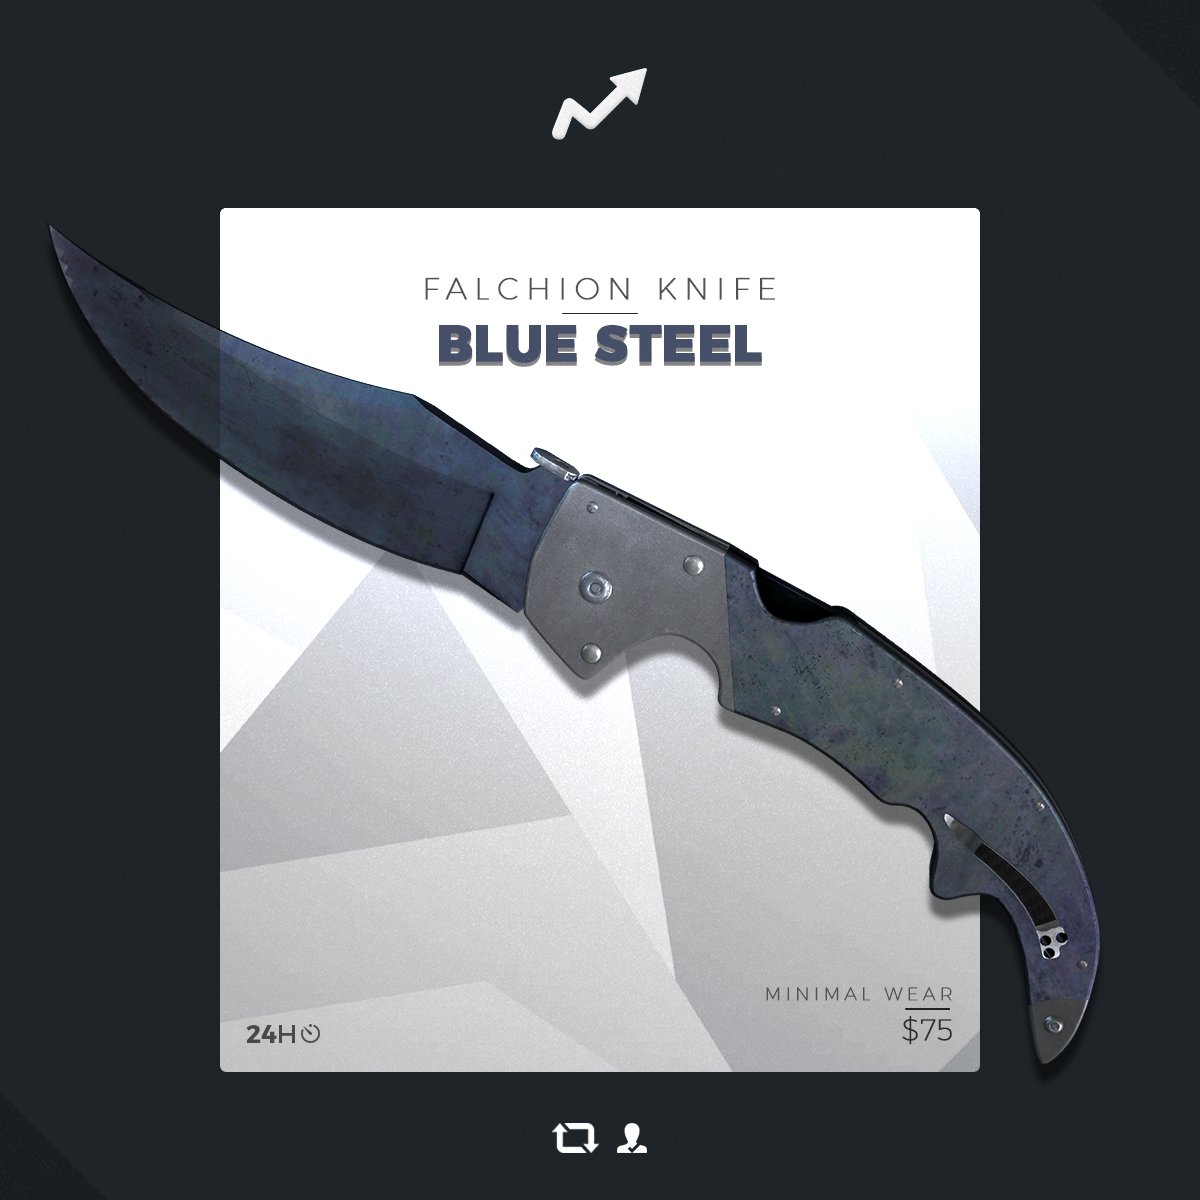 Skinup On Twitter Falchion Knife Blue Steel Giveaway To Enter Retweet Follow Visit Https T Co S7l2z4gmpt Good Luck